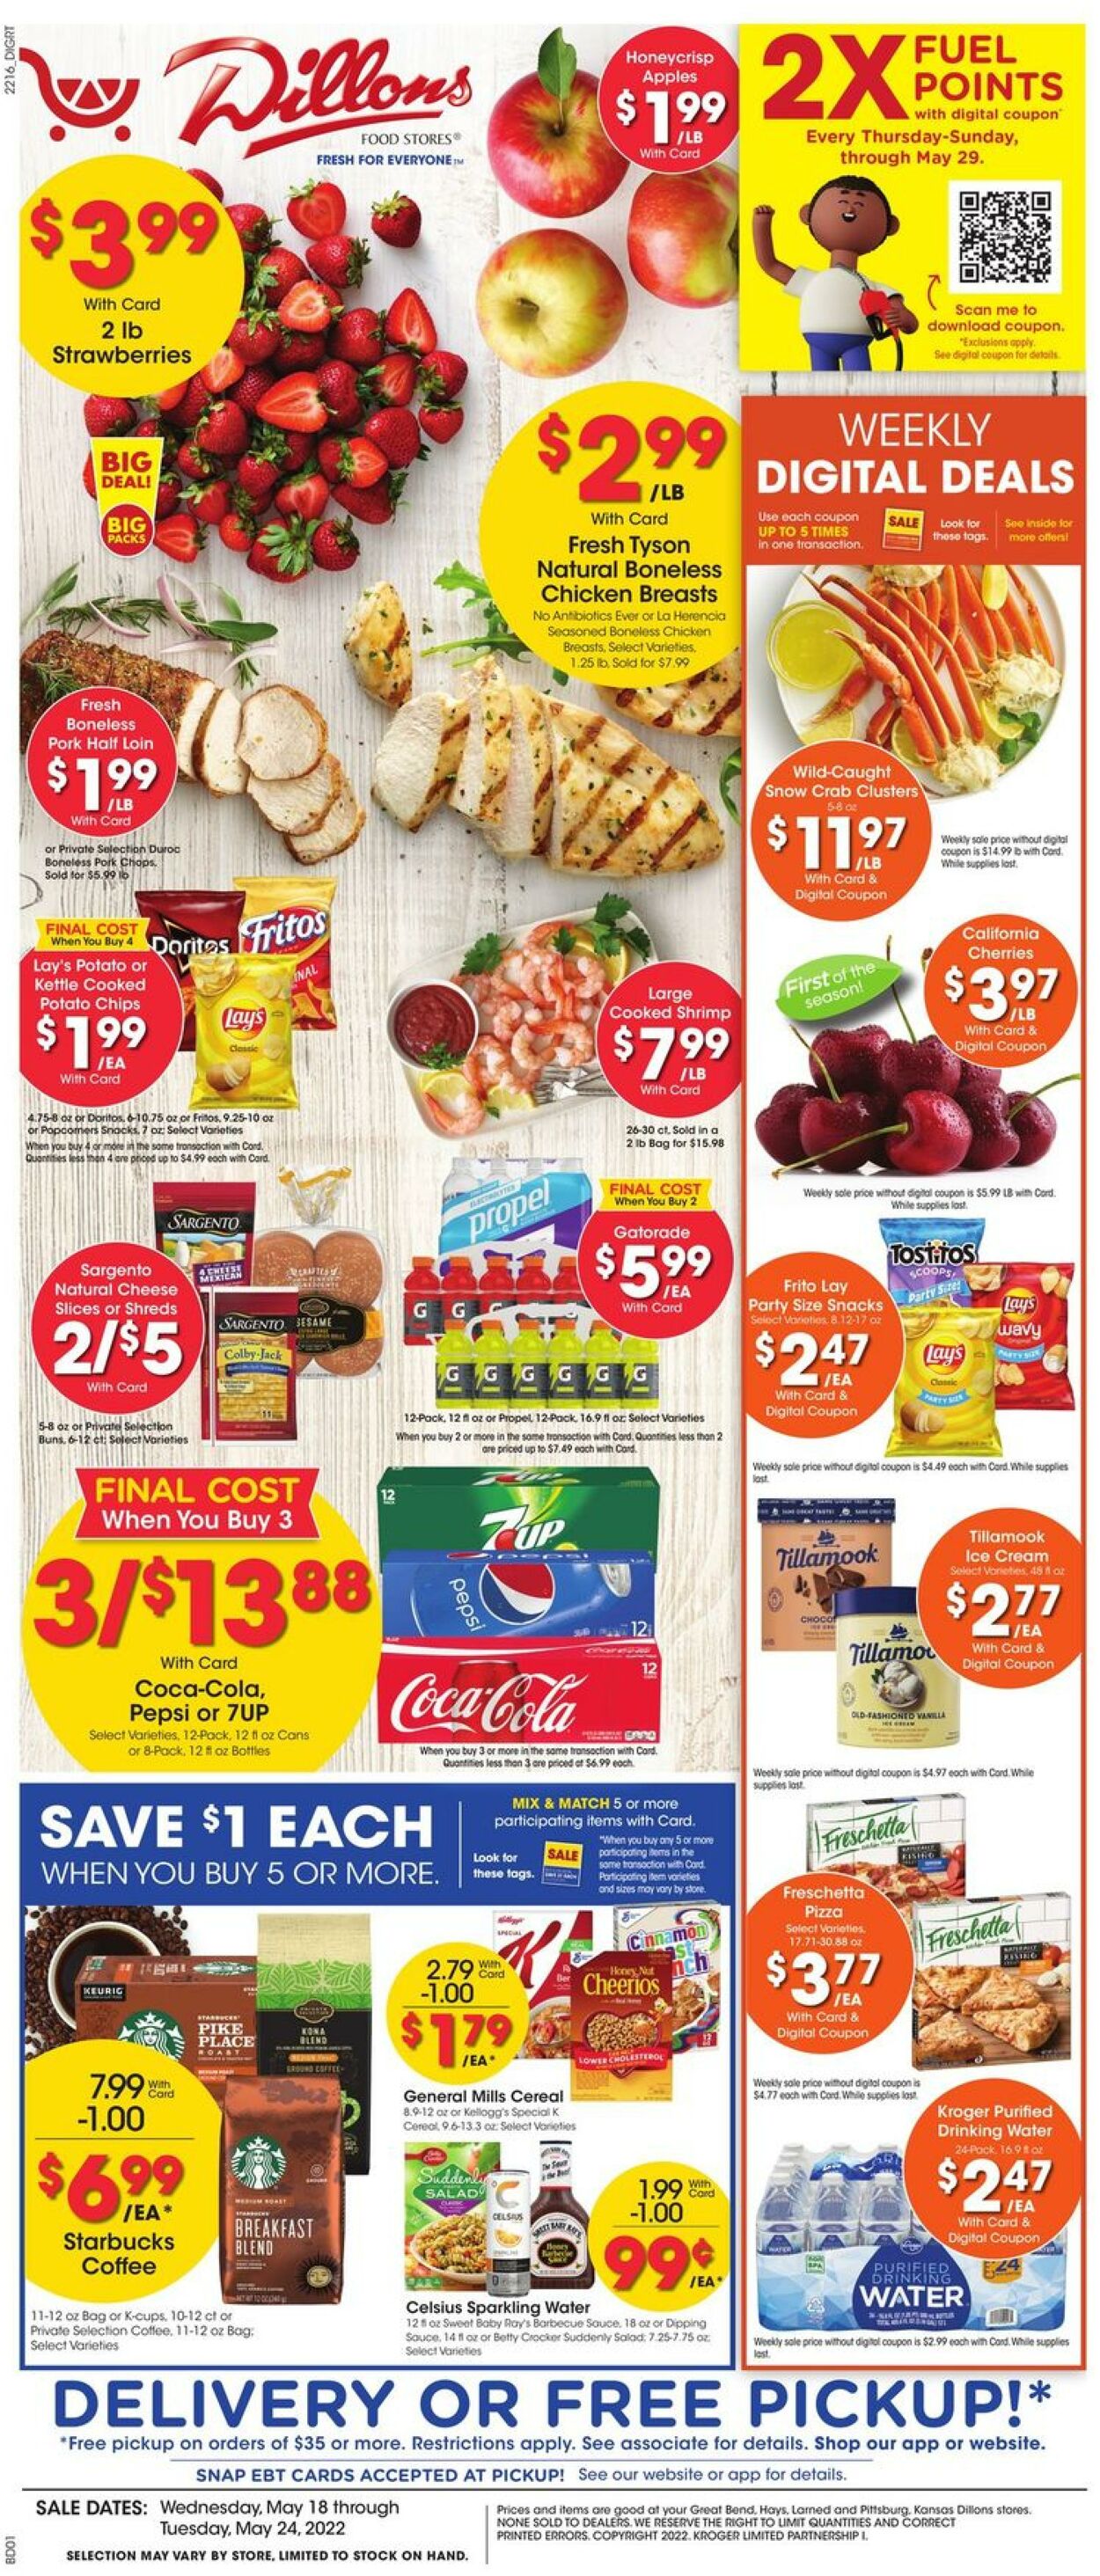 Dillons Promotional weekly ads